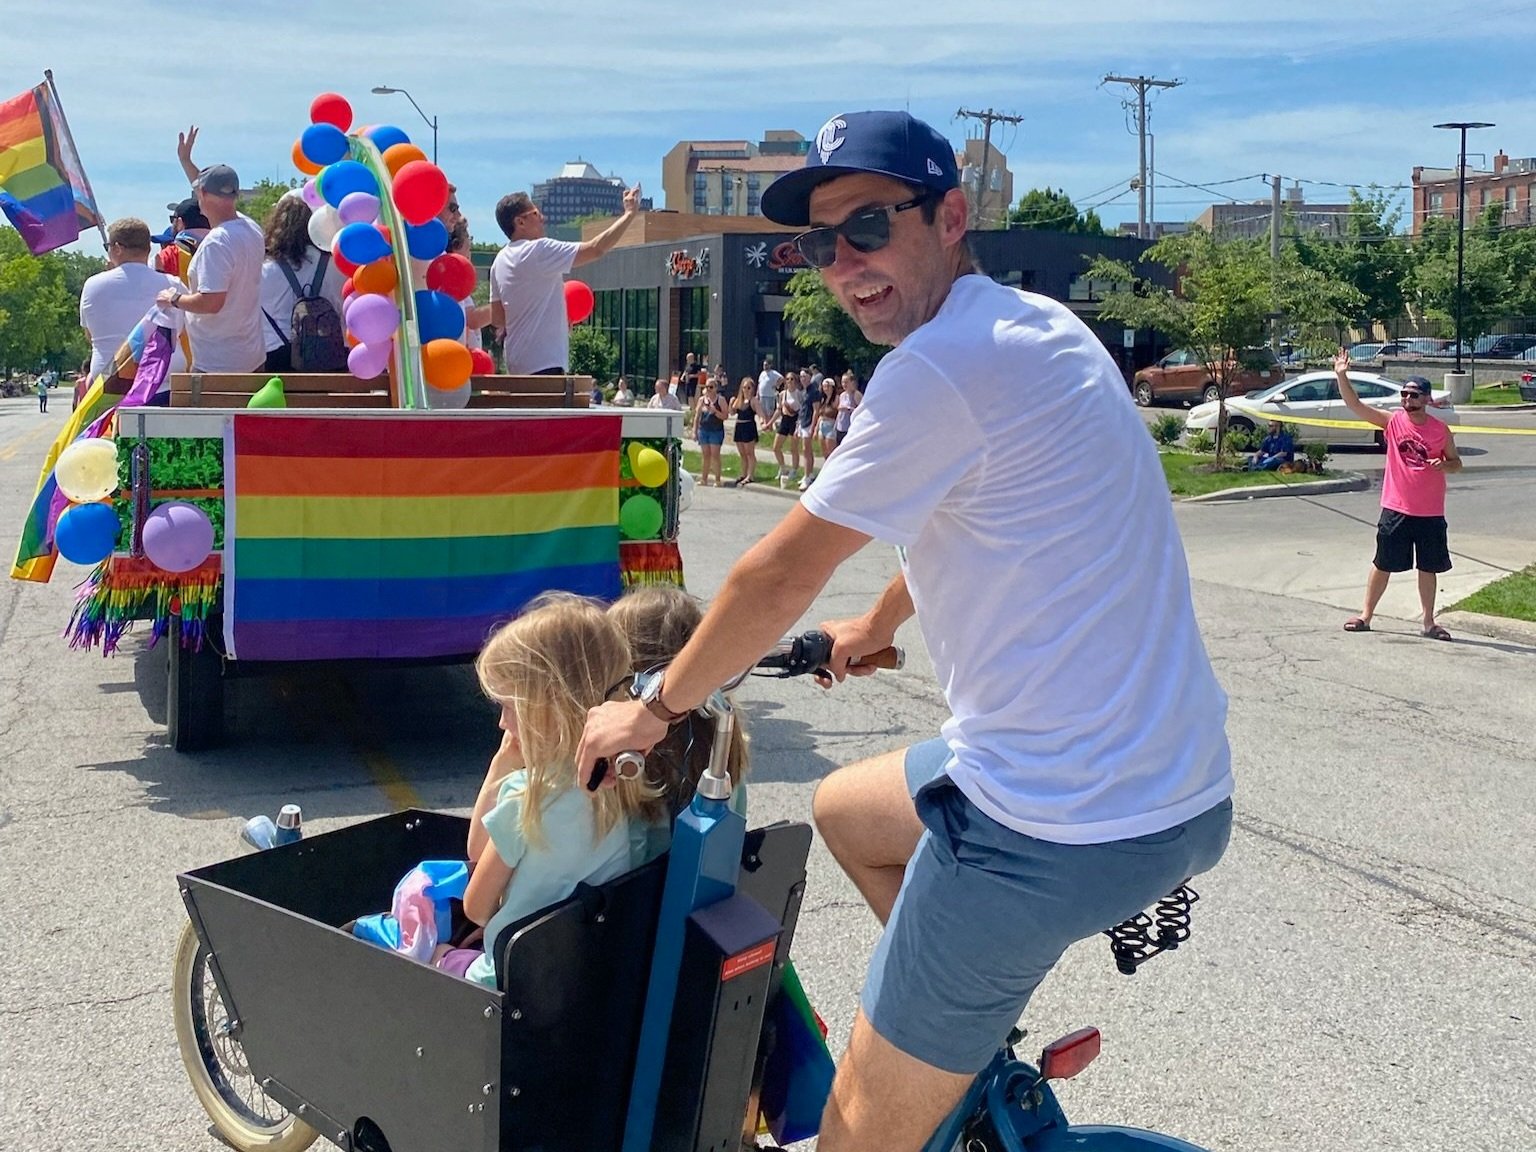 Participated in the KC Pride Parade